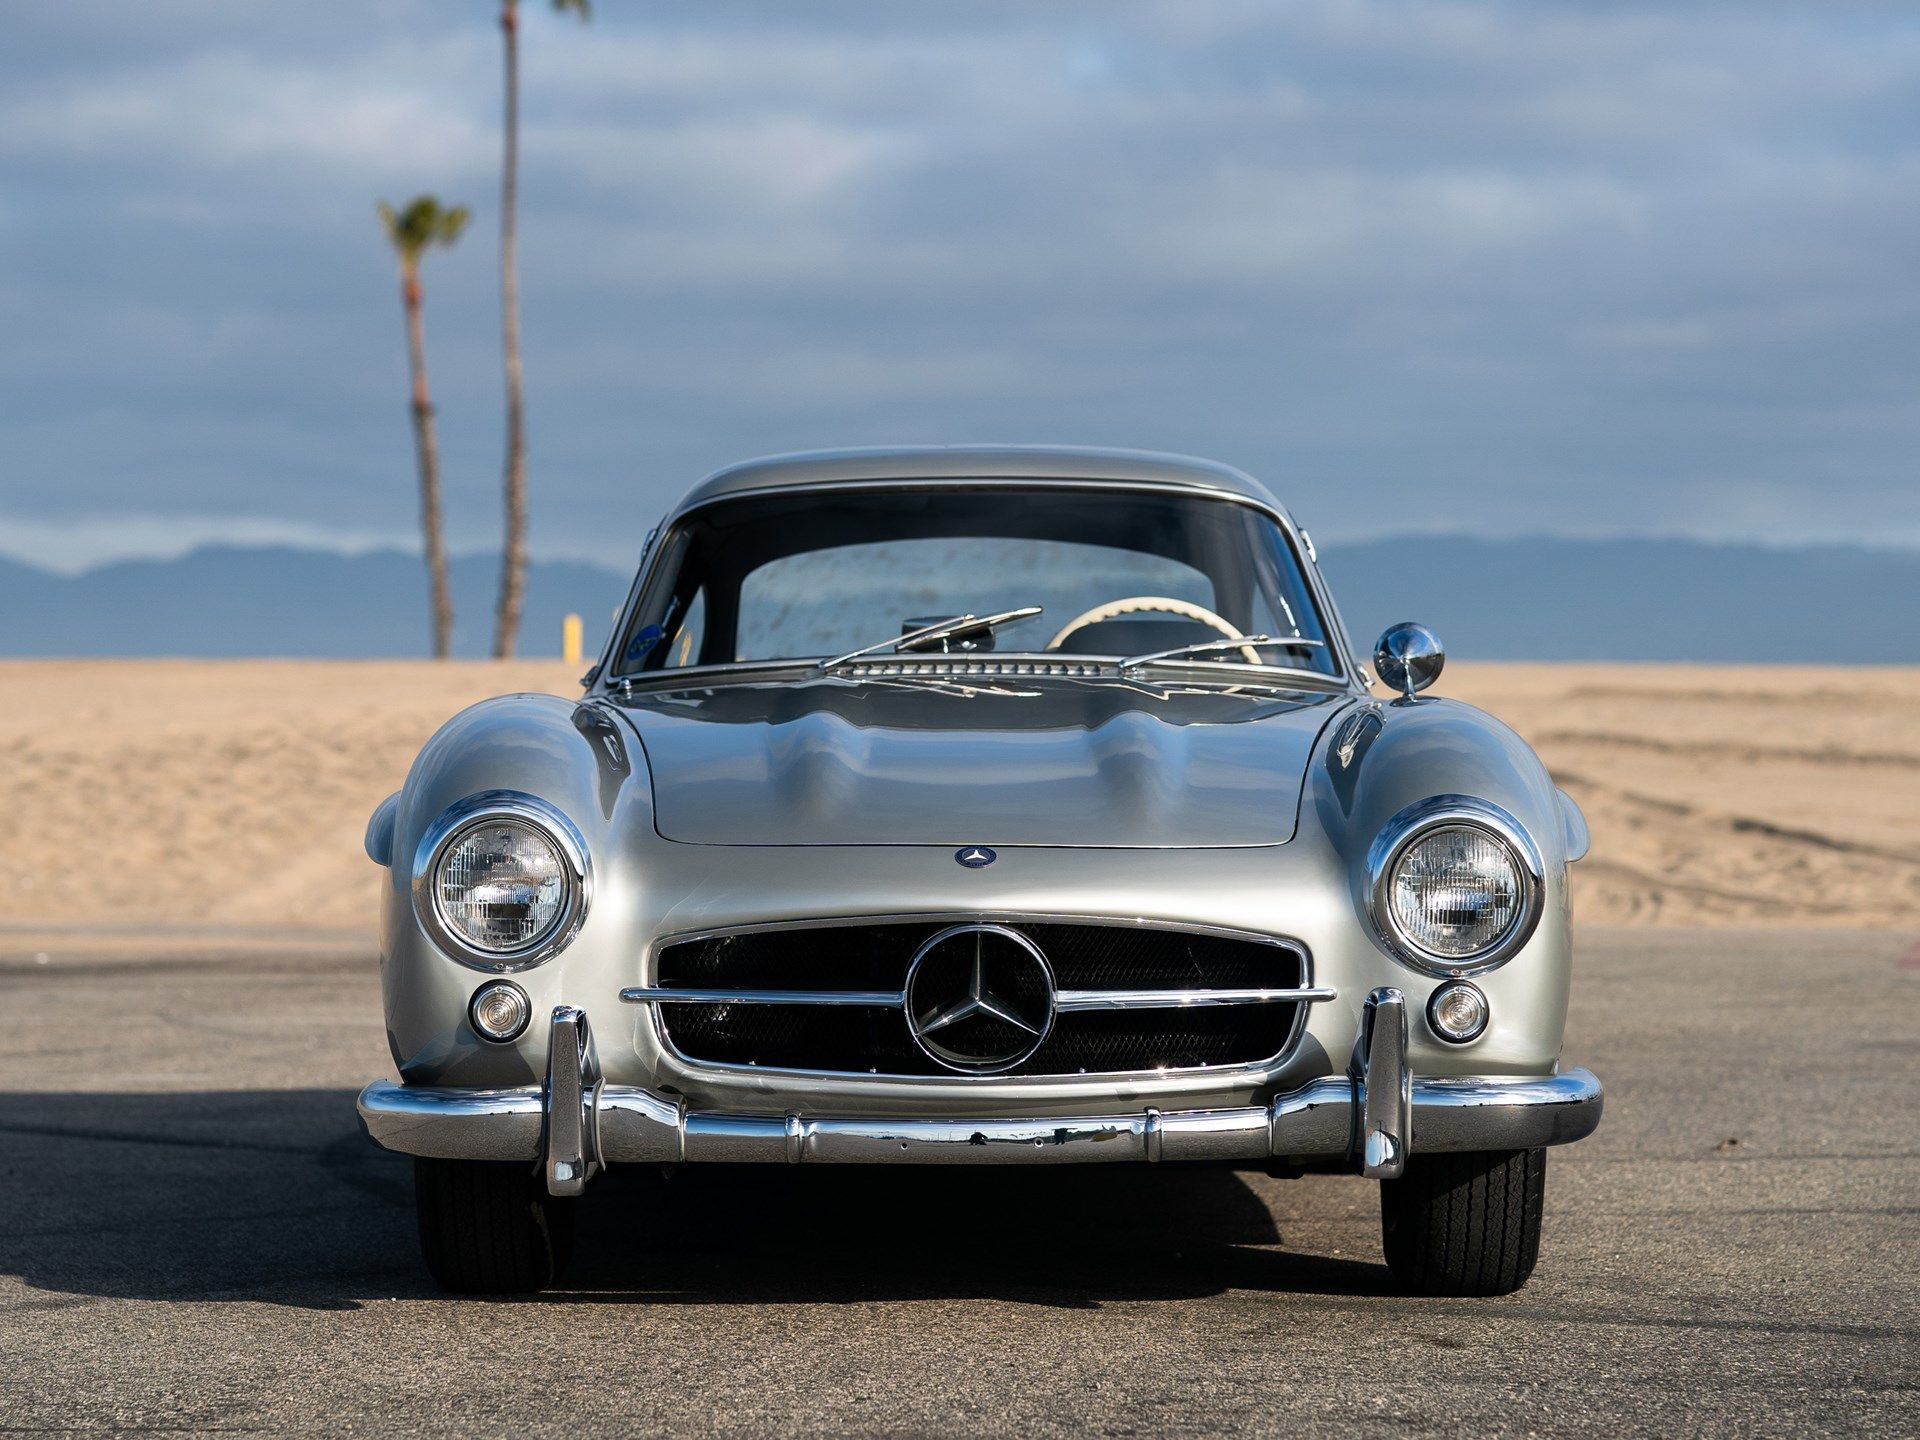 This Mercedes Benz 300SL Gullwing has Moves Like Jagger, but it might not sell big